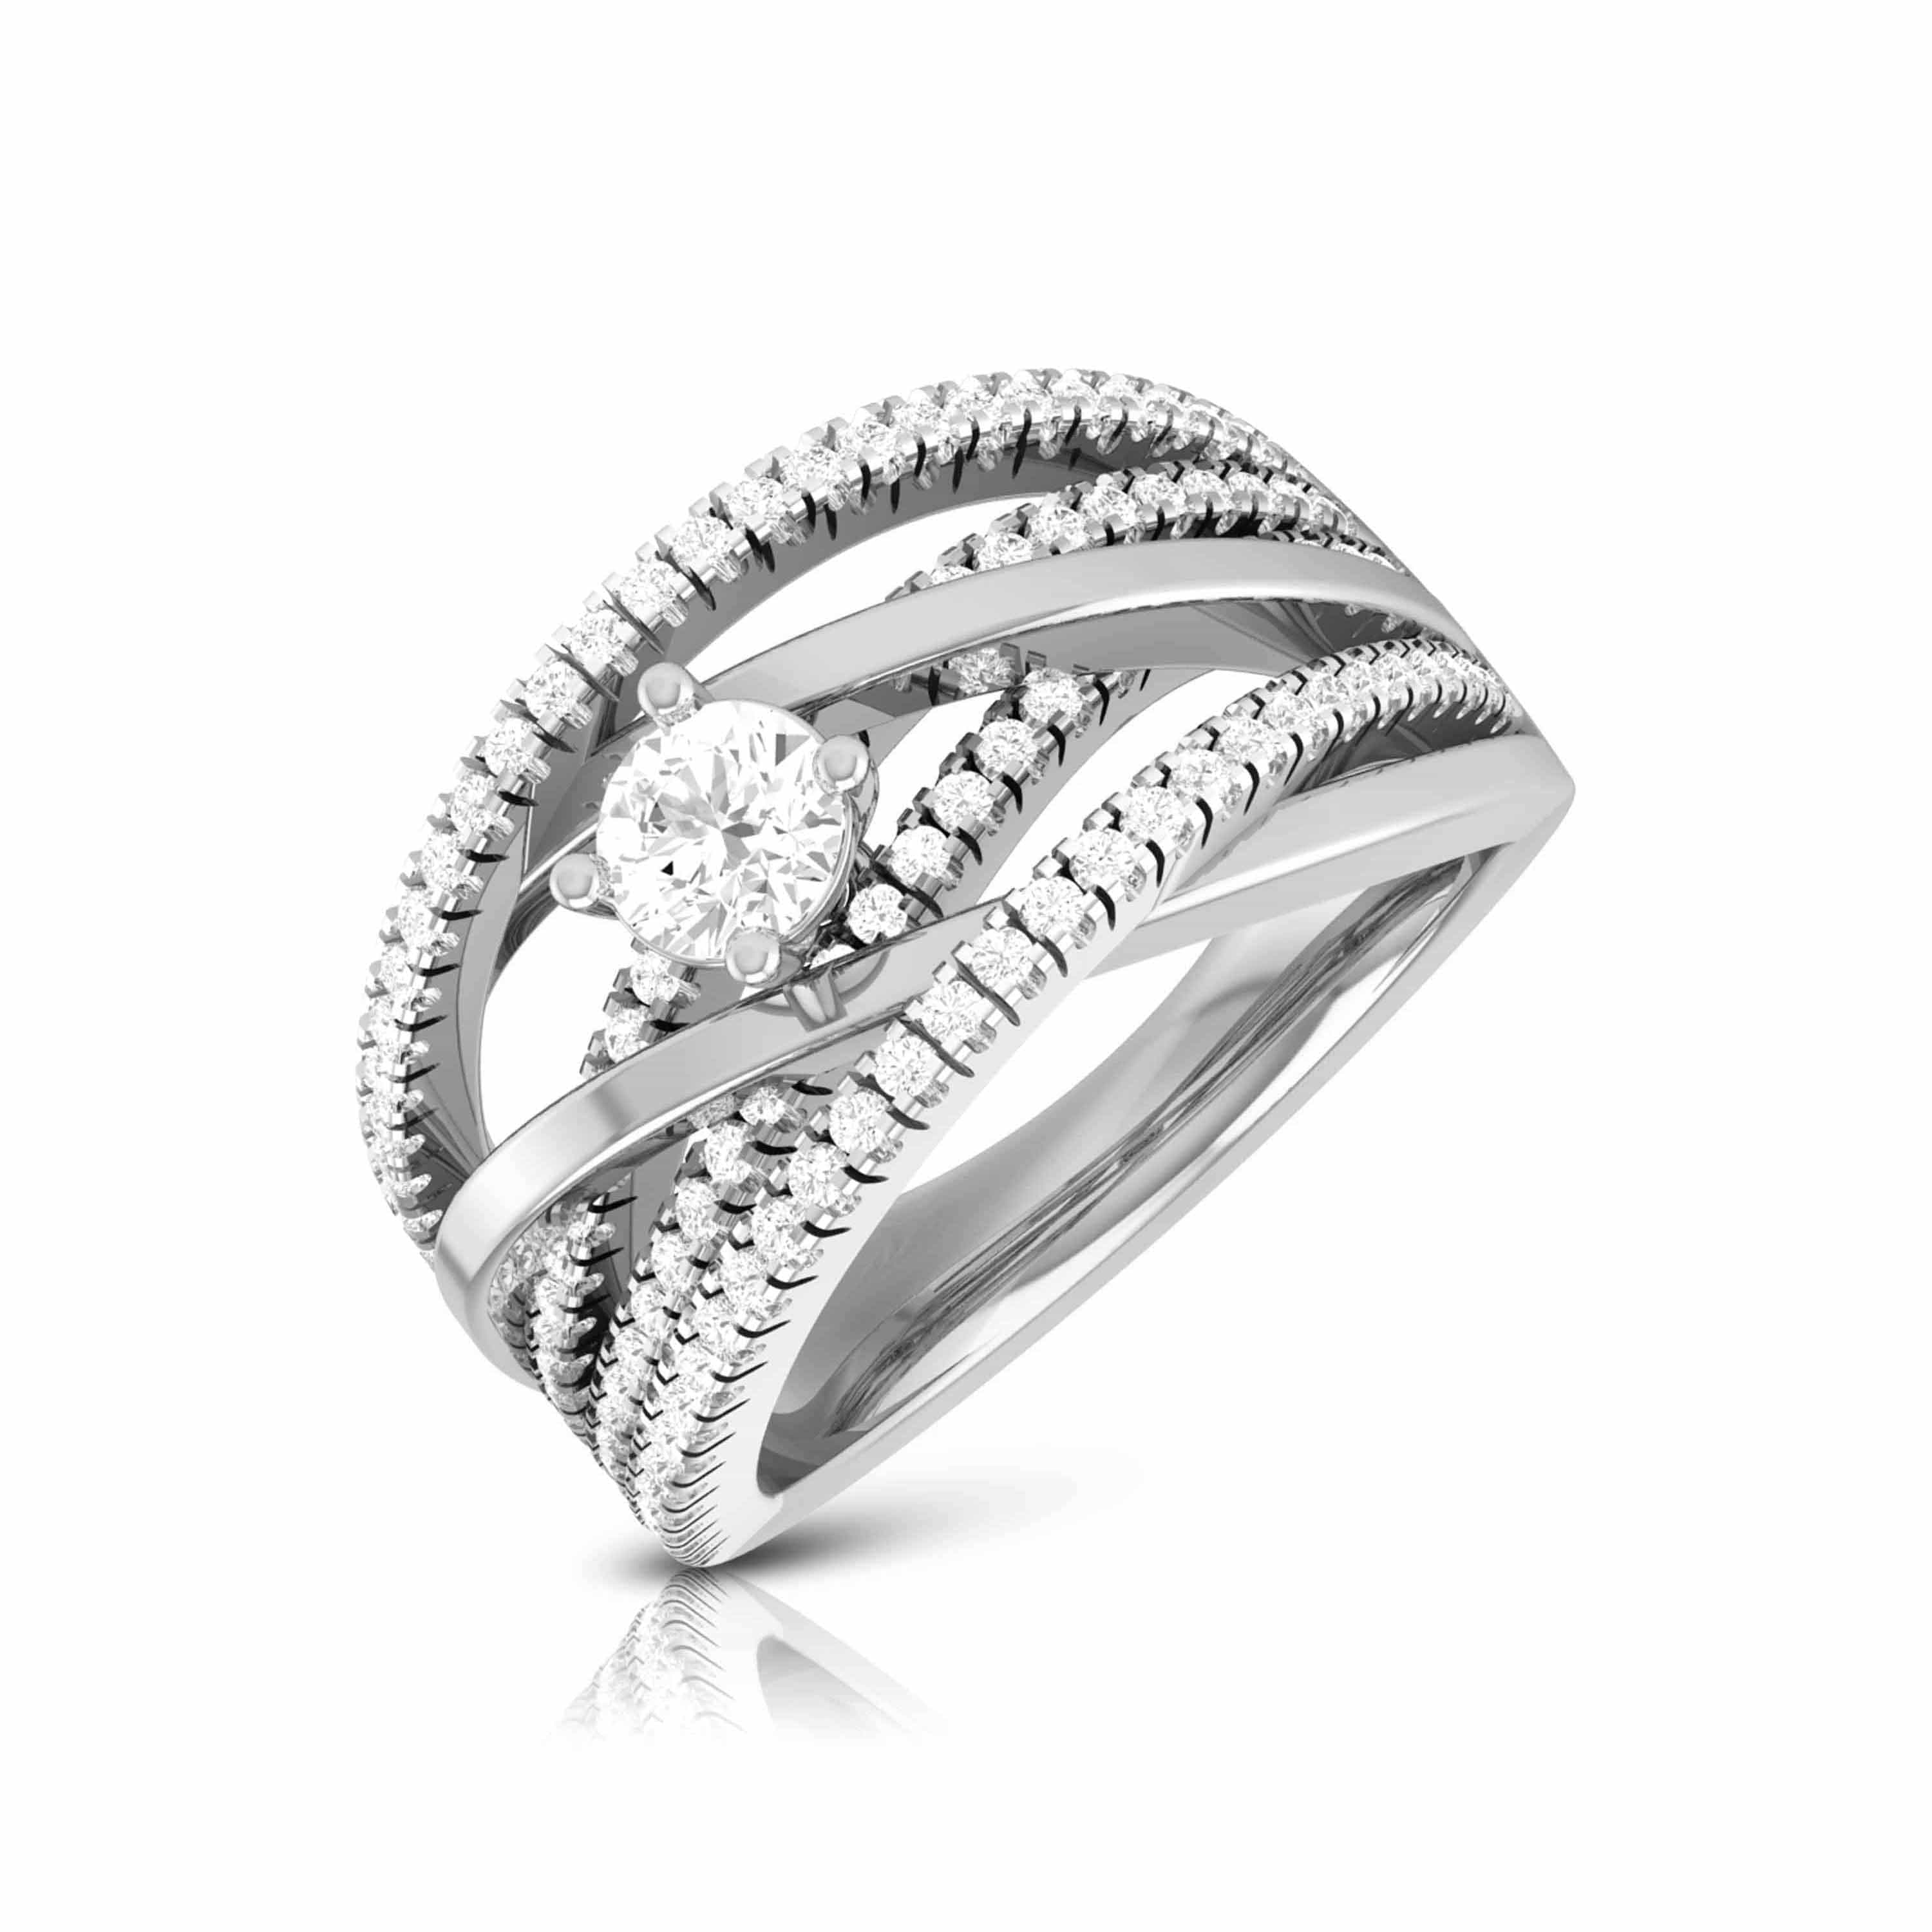 SOLITAIRE DIAMOND ENGAGEMENT RINGS FOR WOMEN